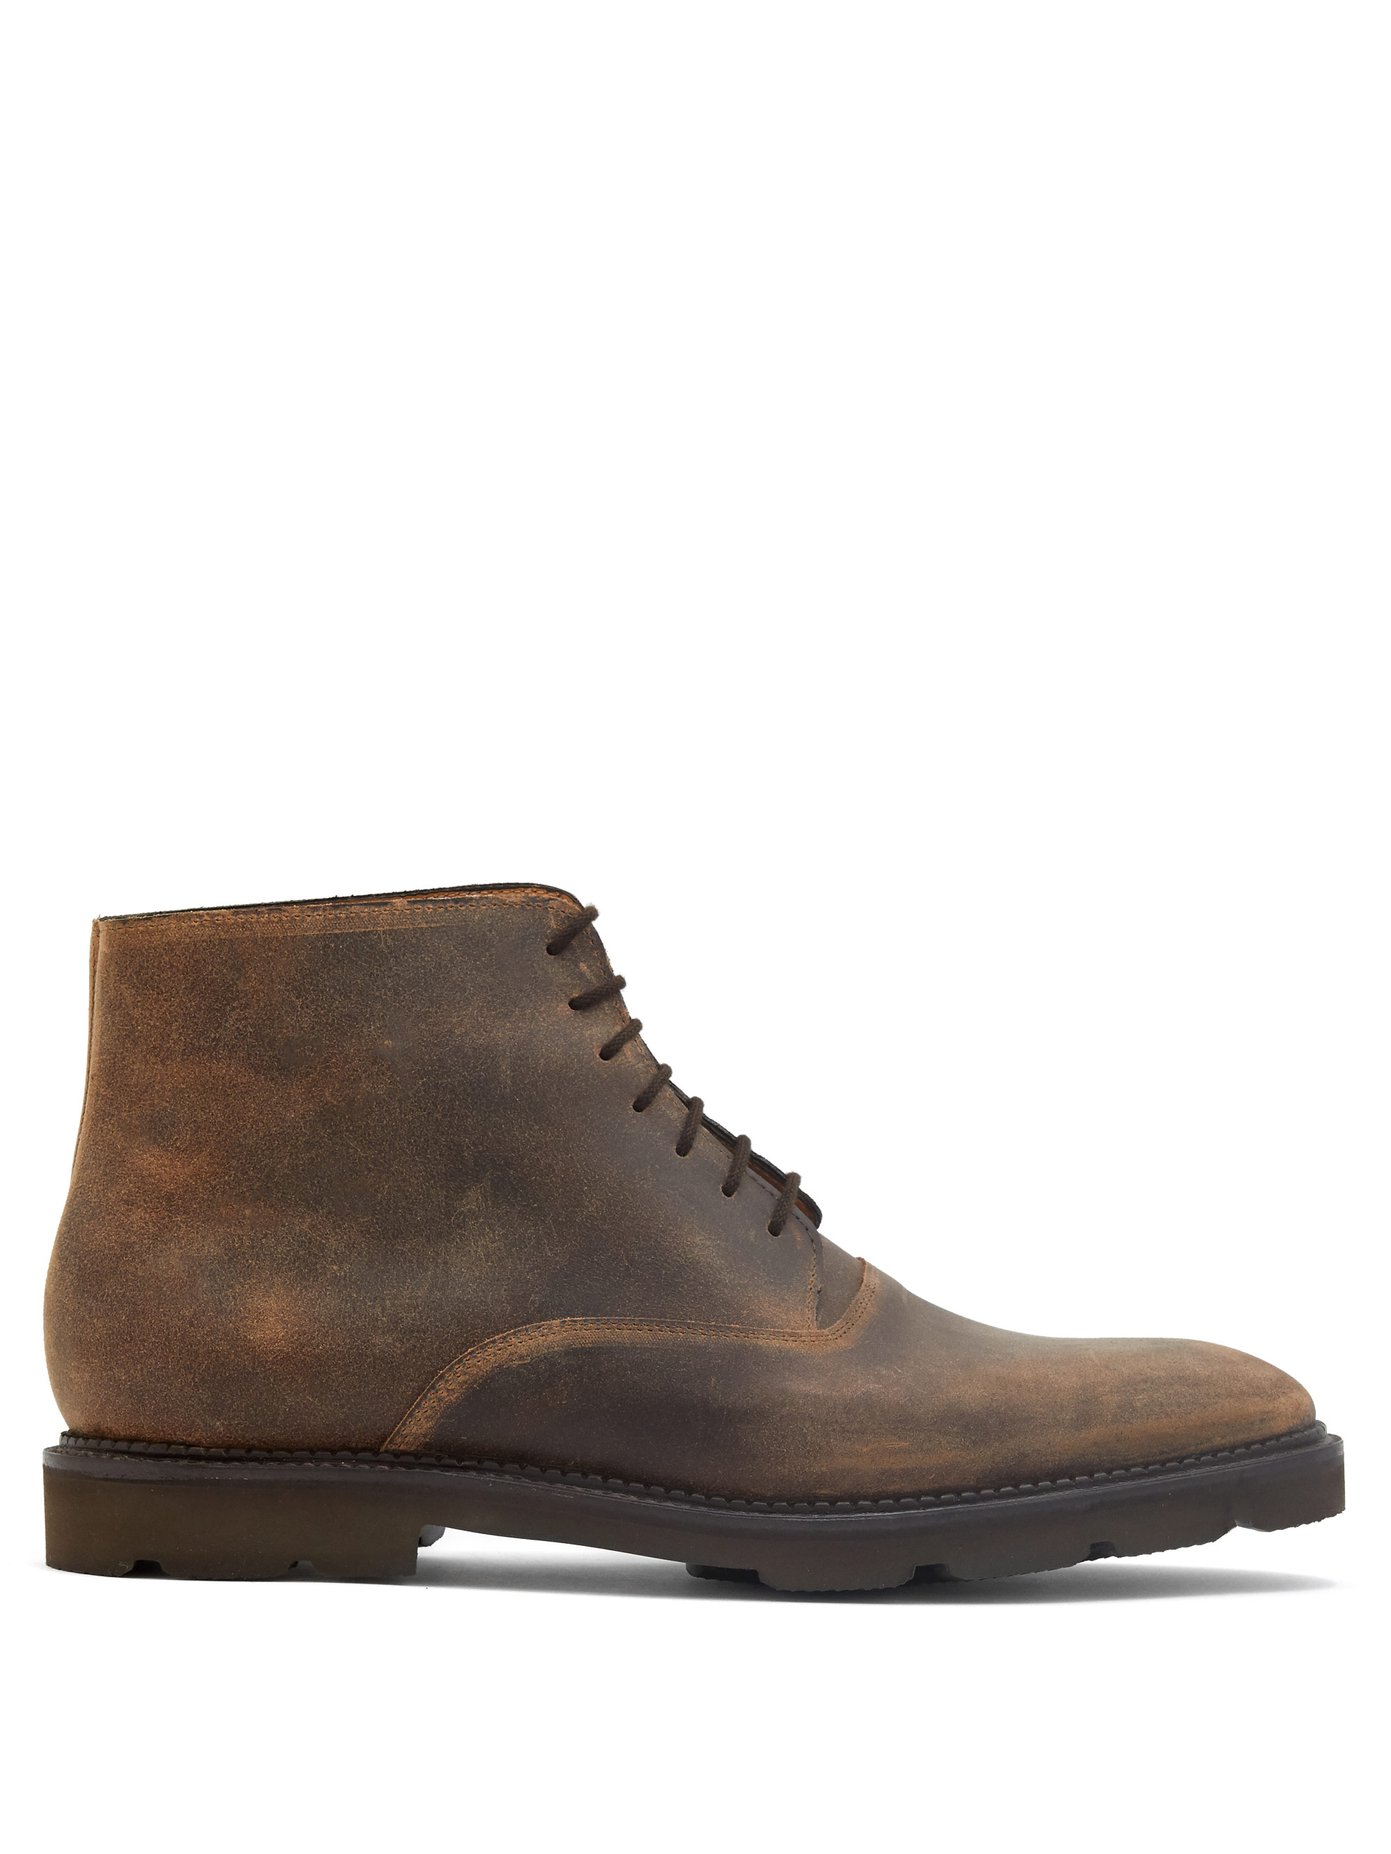 waxed suede boots mens